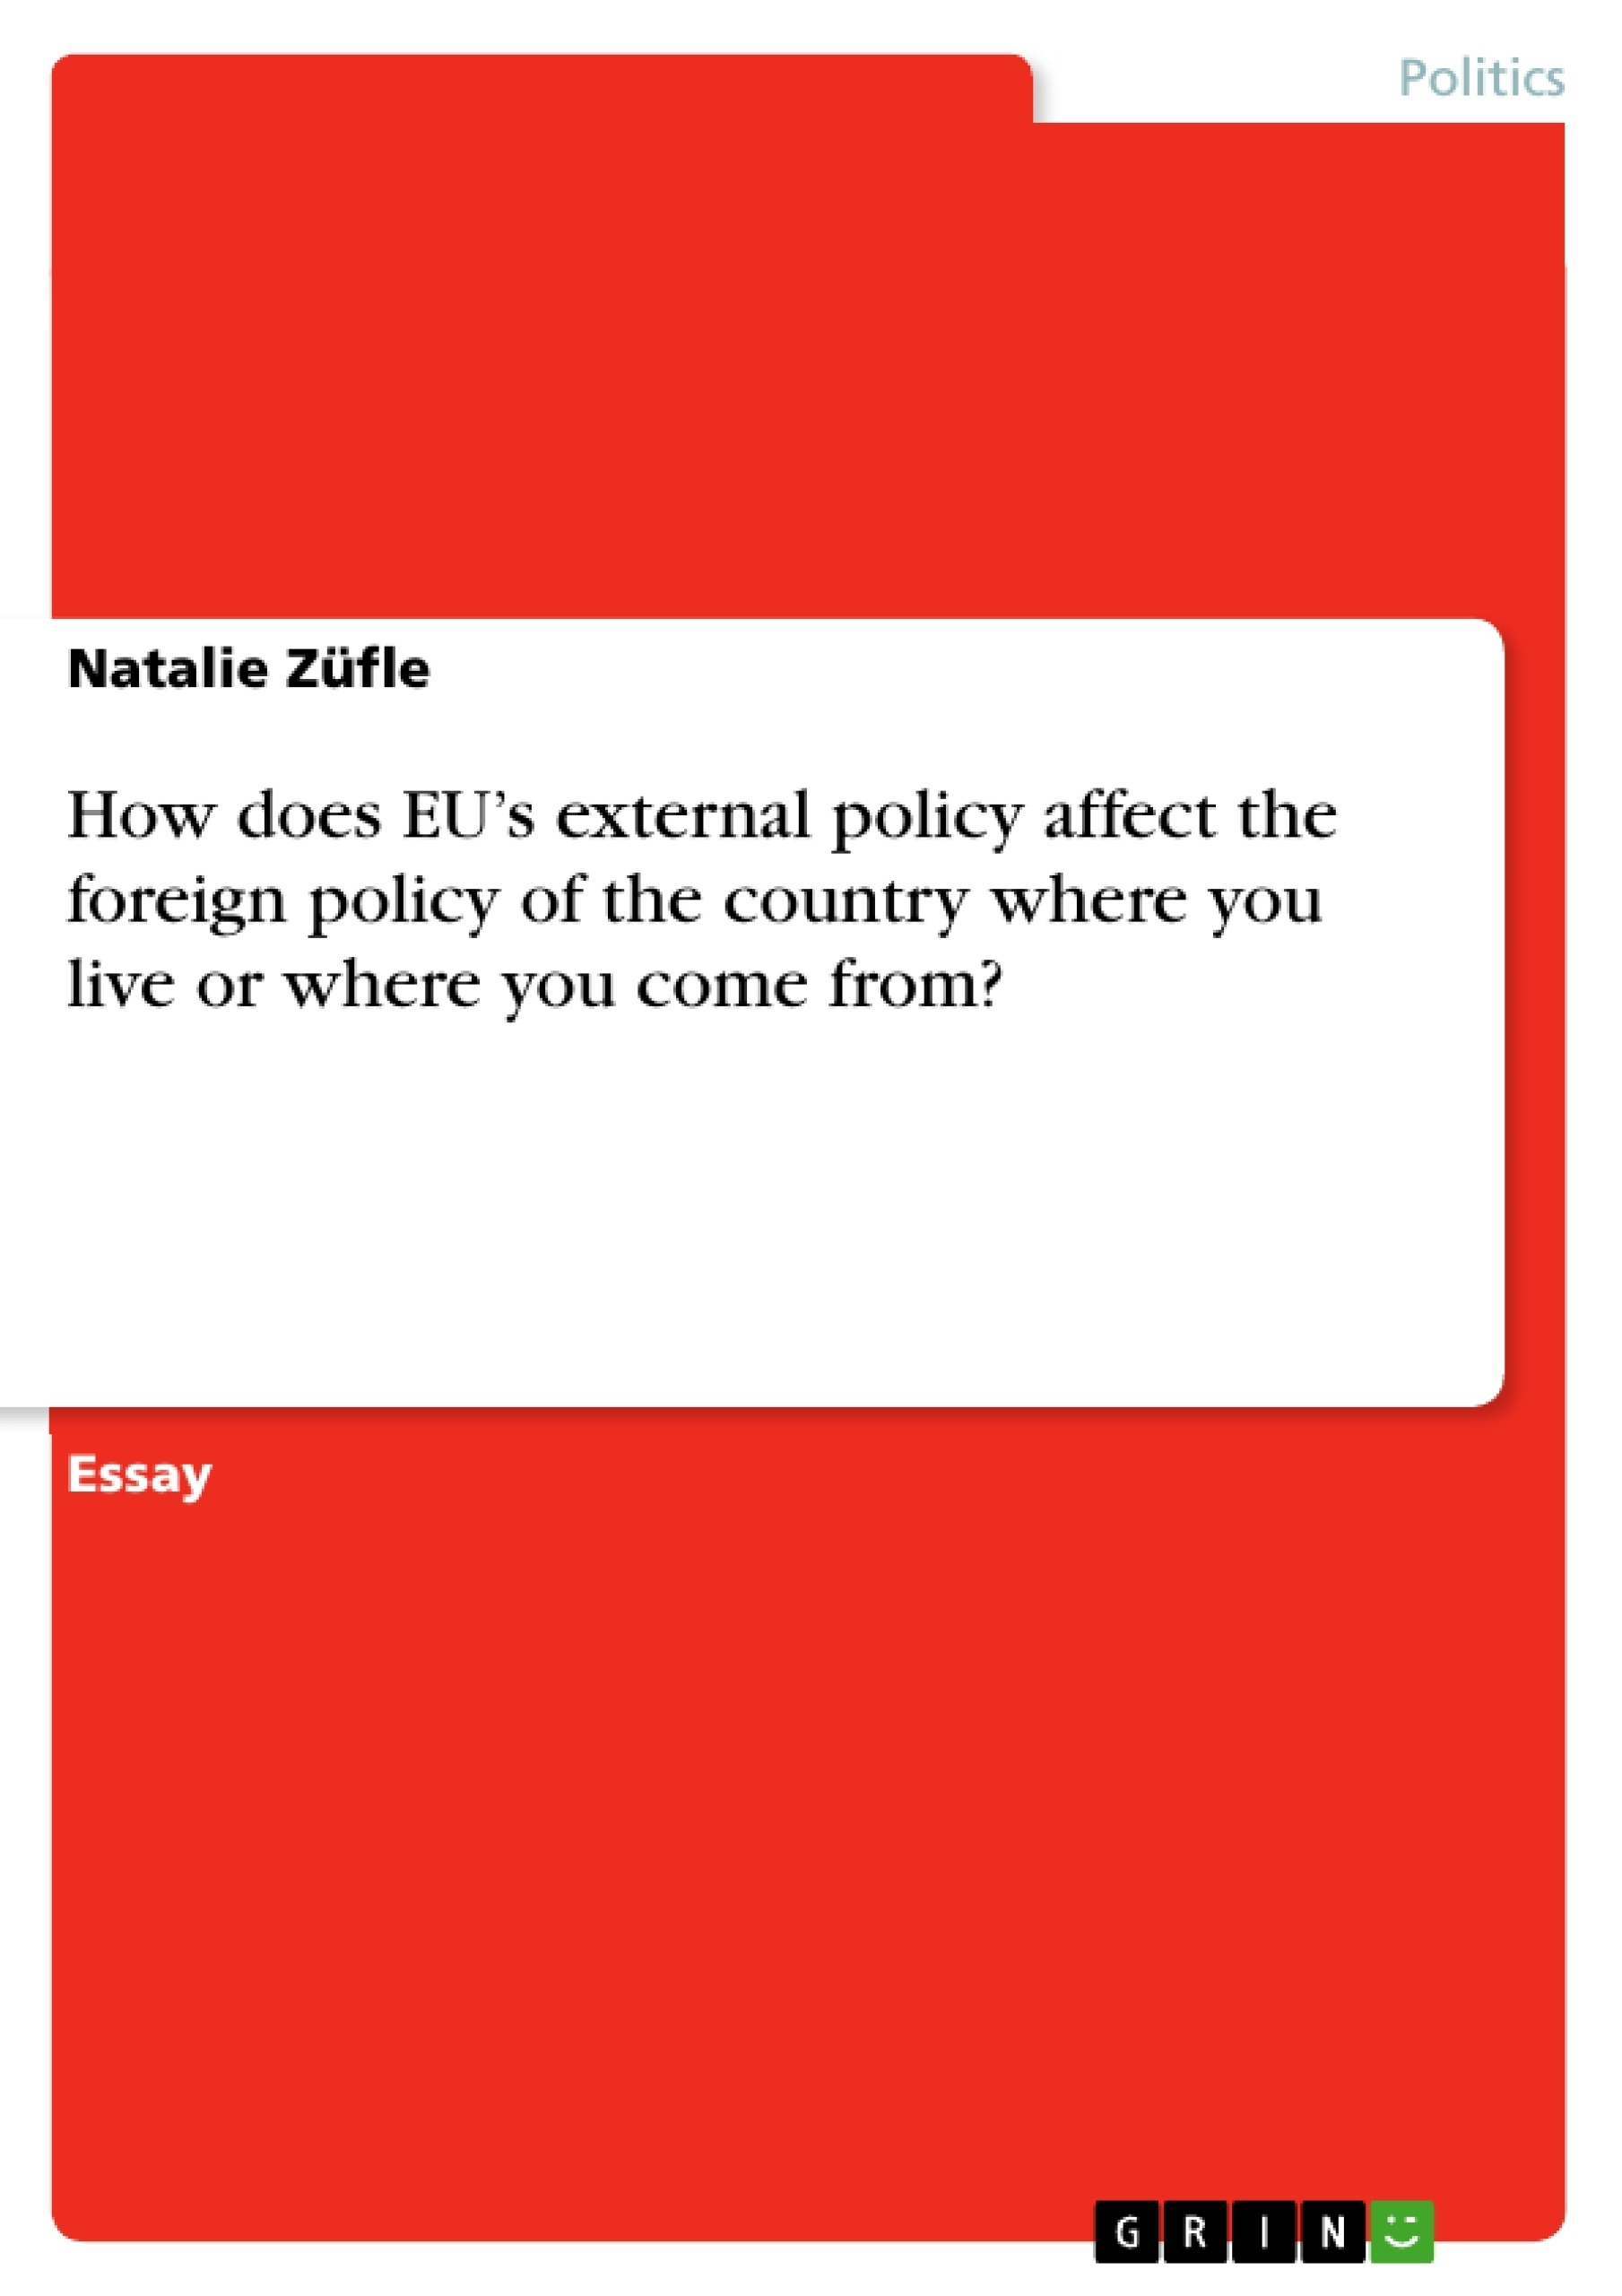 Título: How does EU’s external policy affect the foreign policy of the country where you live or where you come from?